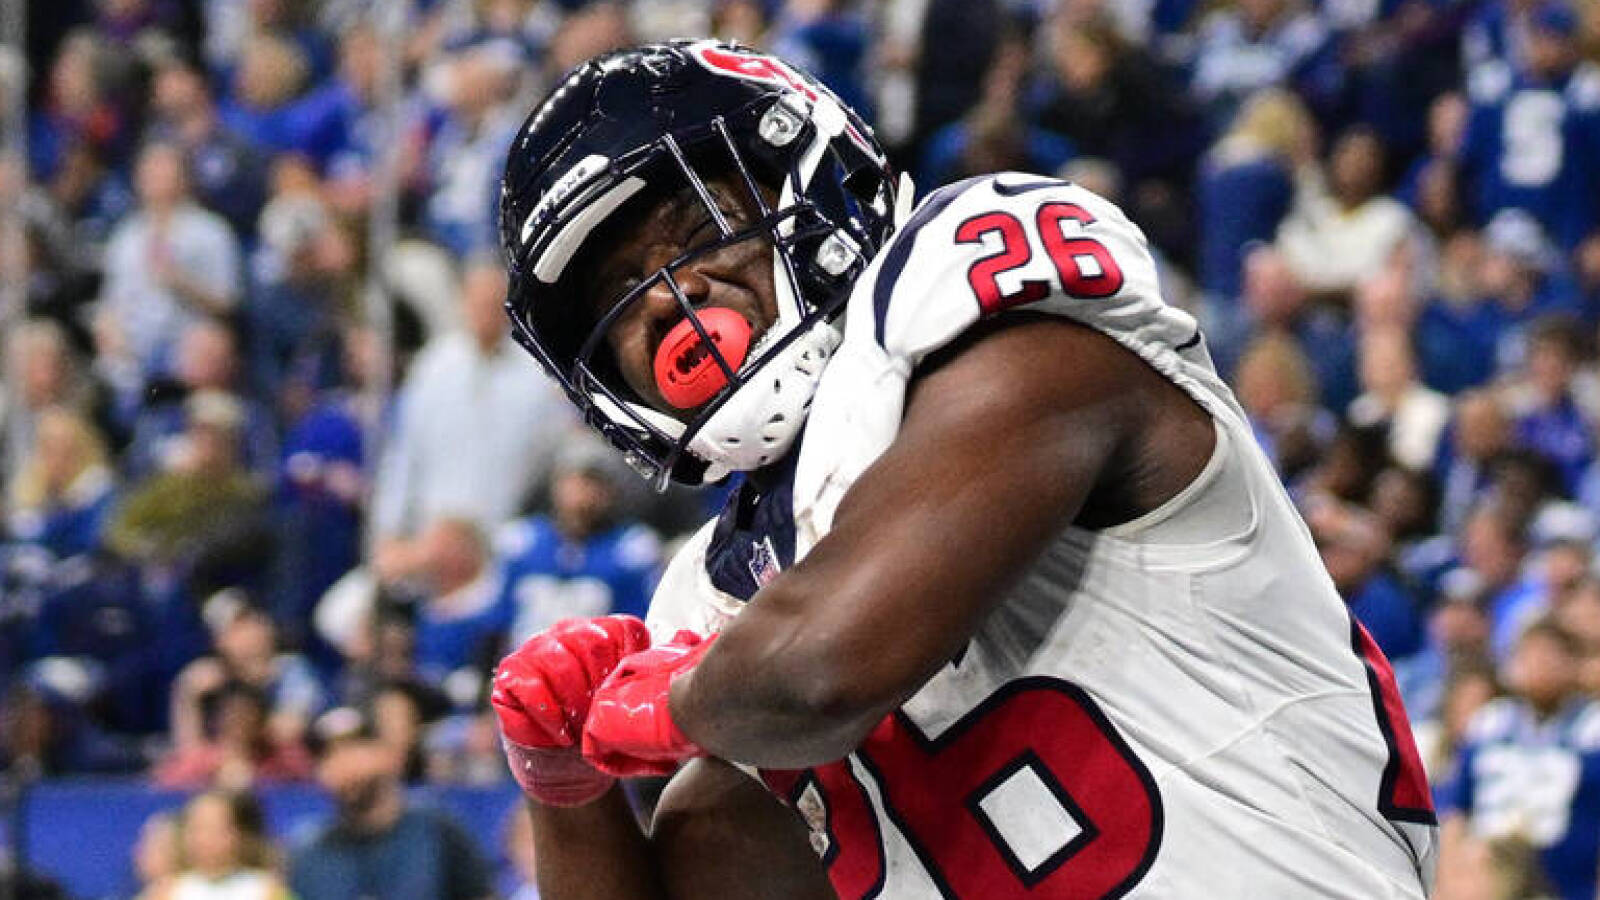 Takeaways from the Texans' dramatic postseason-clinching win over Colts